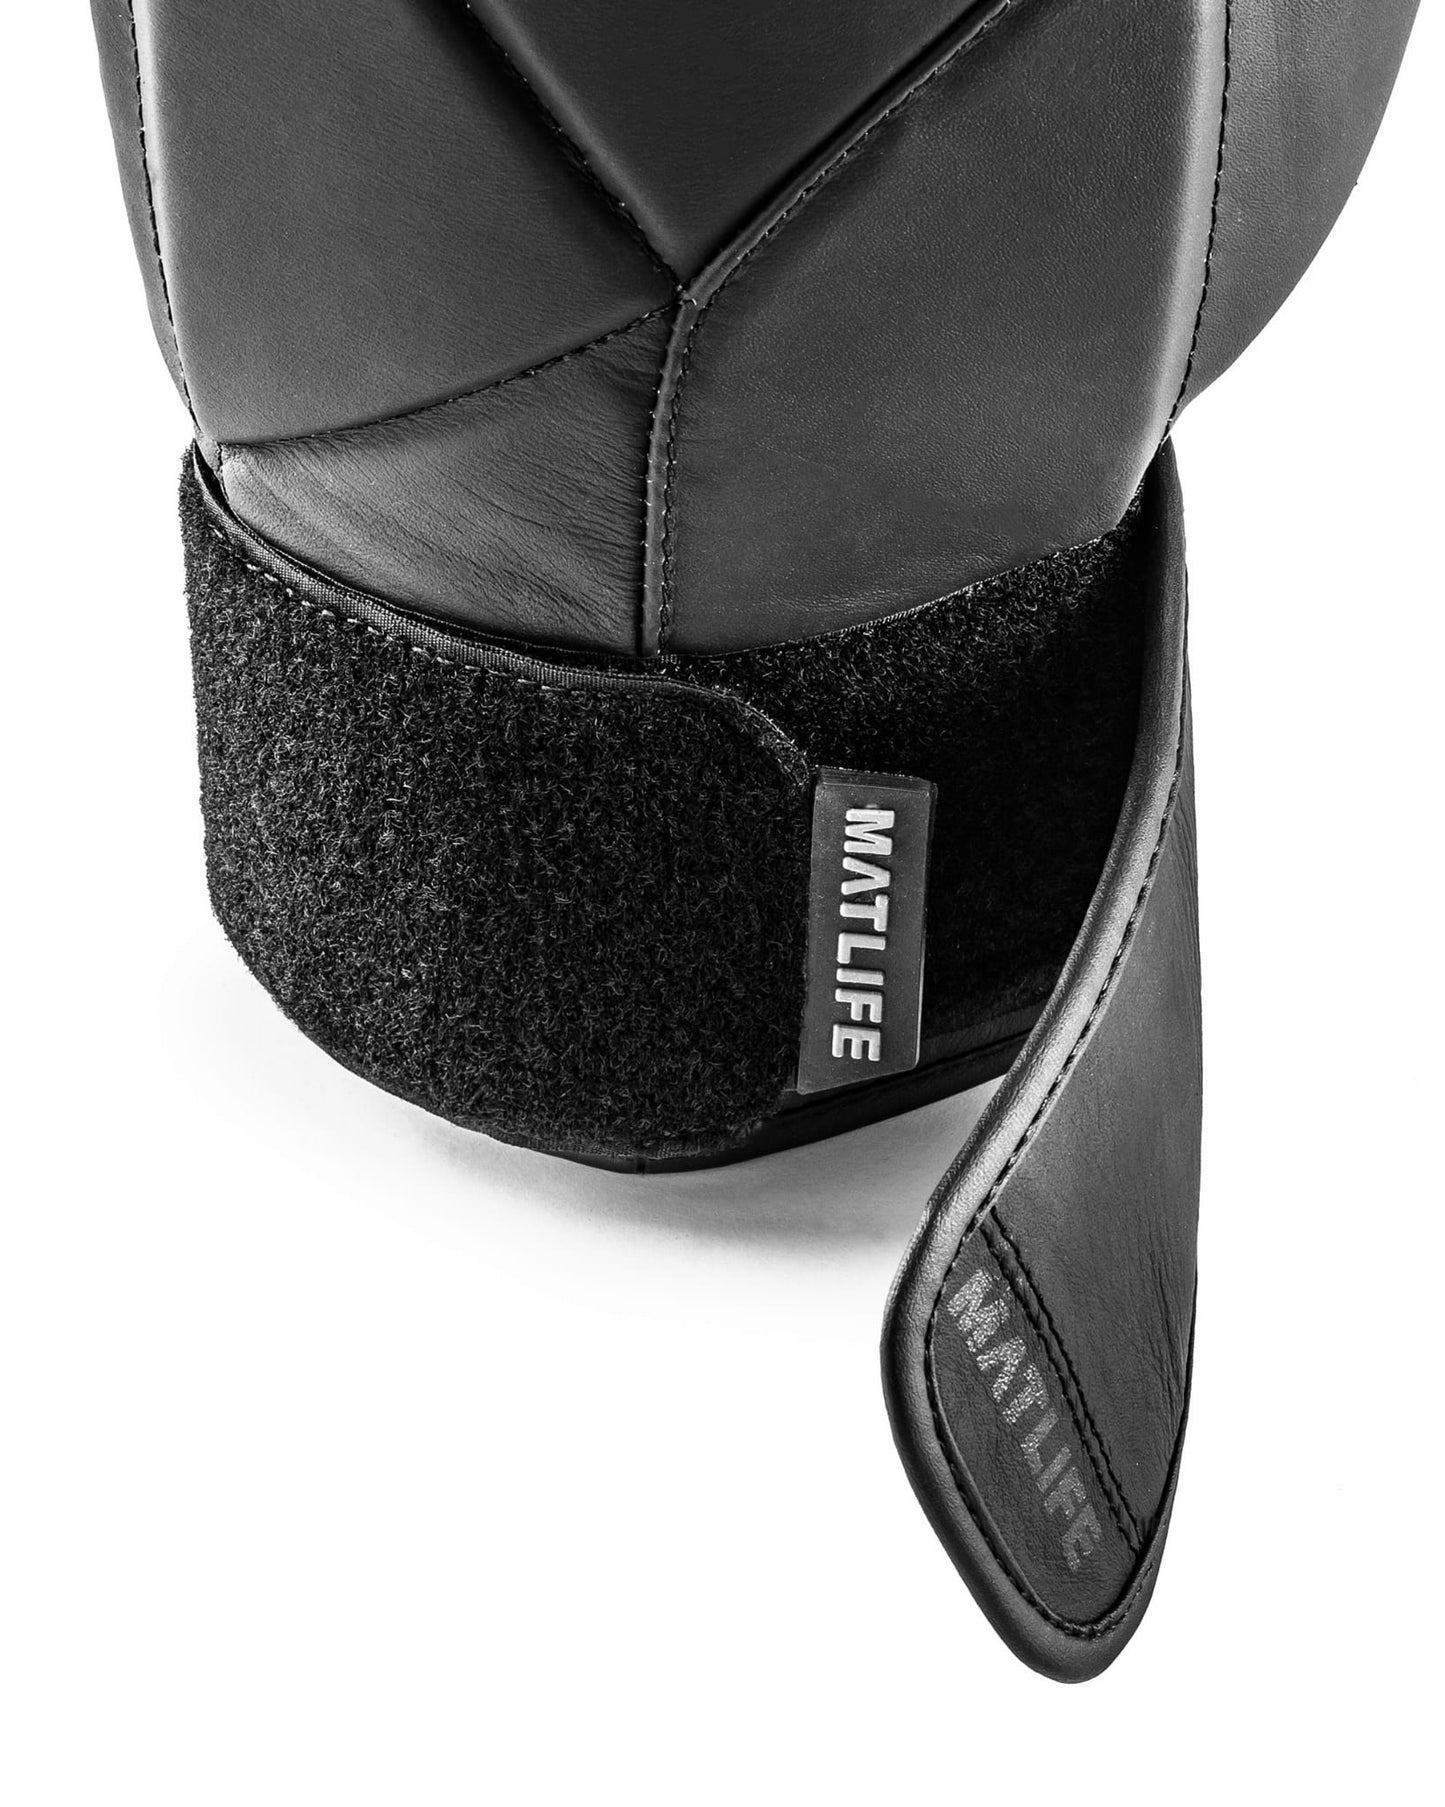 "PRIMARY" BOXING GLOVES